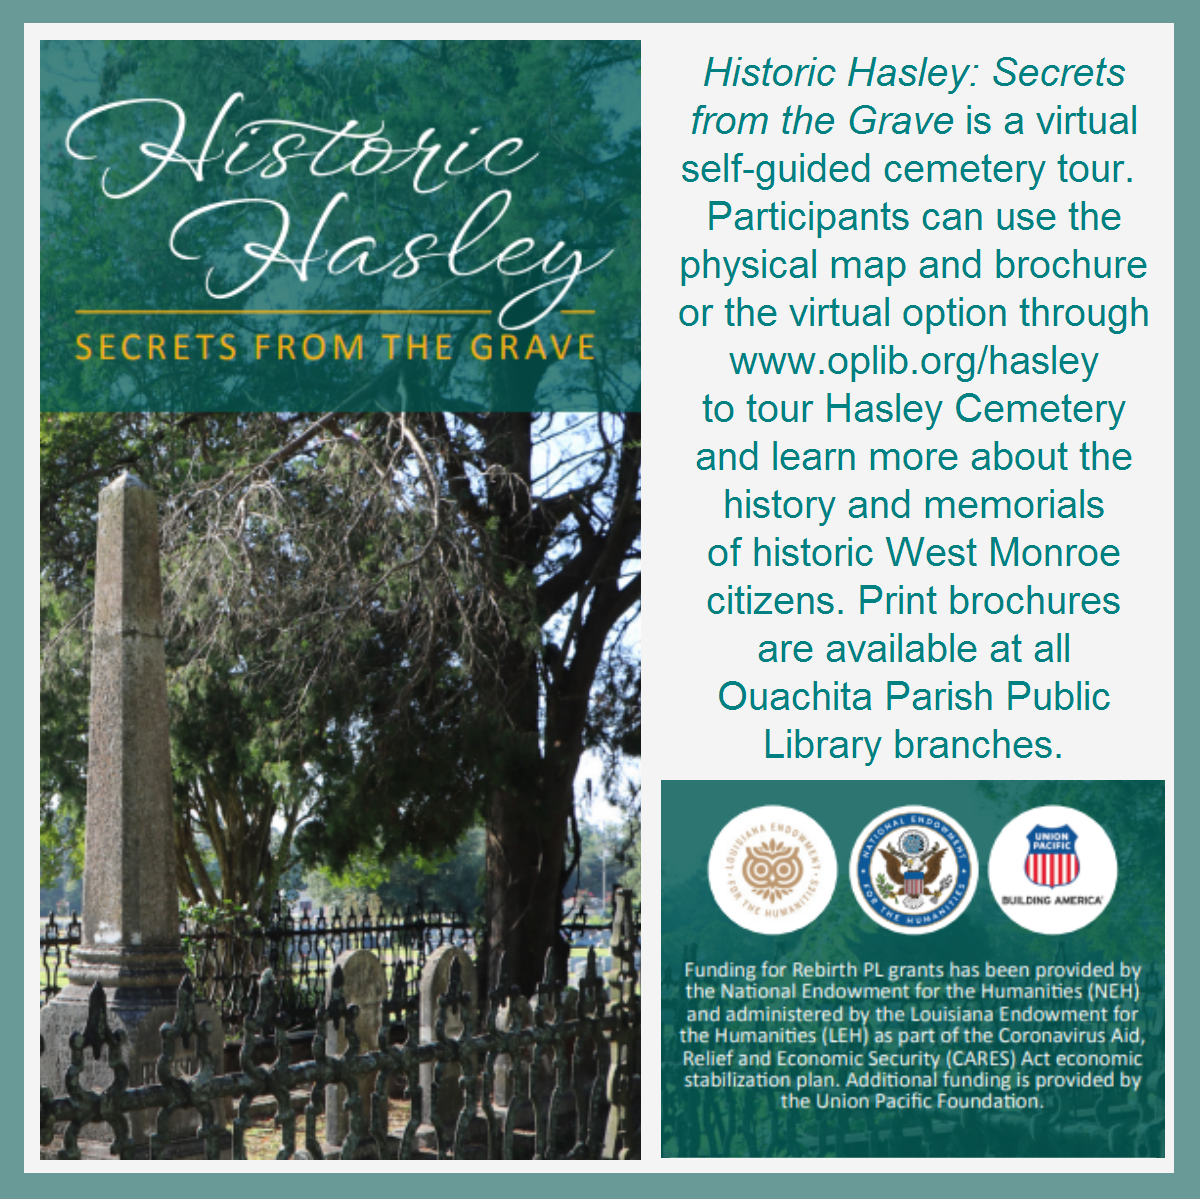 Image from the Hasley Cemetery Tour Brochure